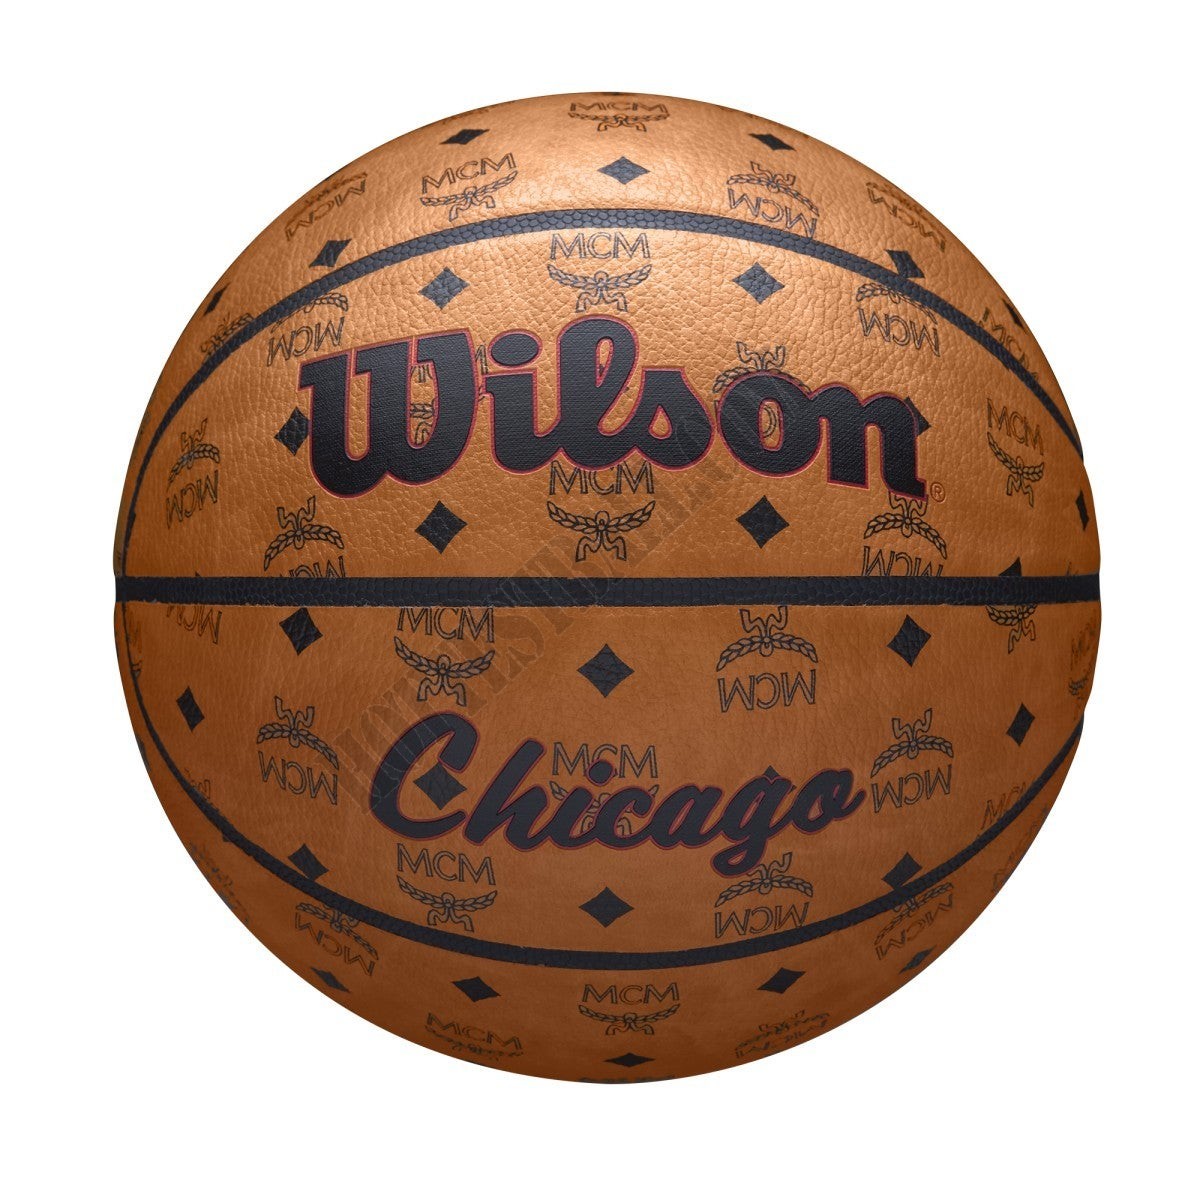 MCM x Chicago Limited Edition Basketball - Wilson Discount Store - MCM x Chicago Limited Edition Basketball - Wilson Discount Store